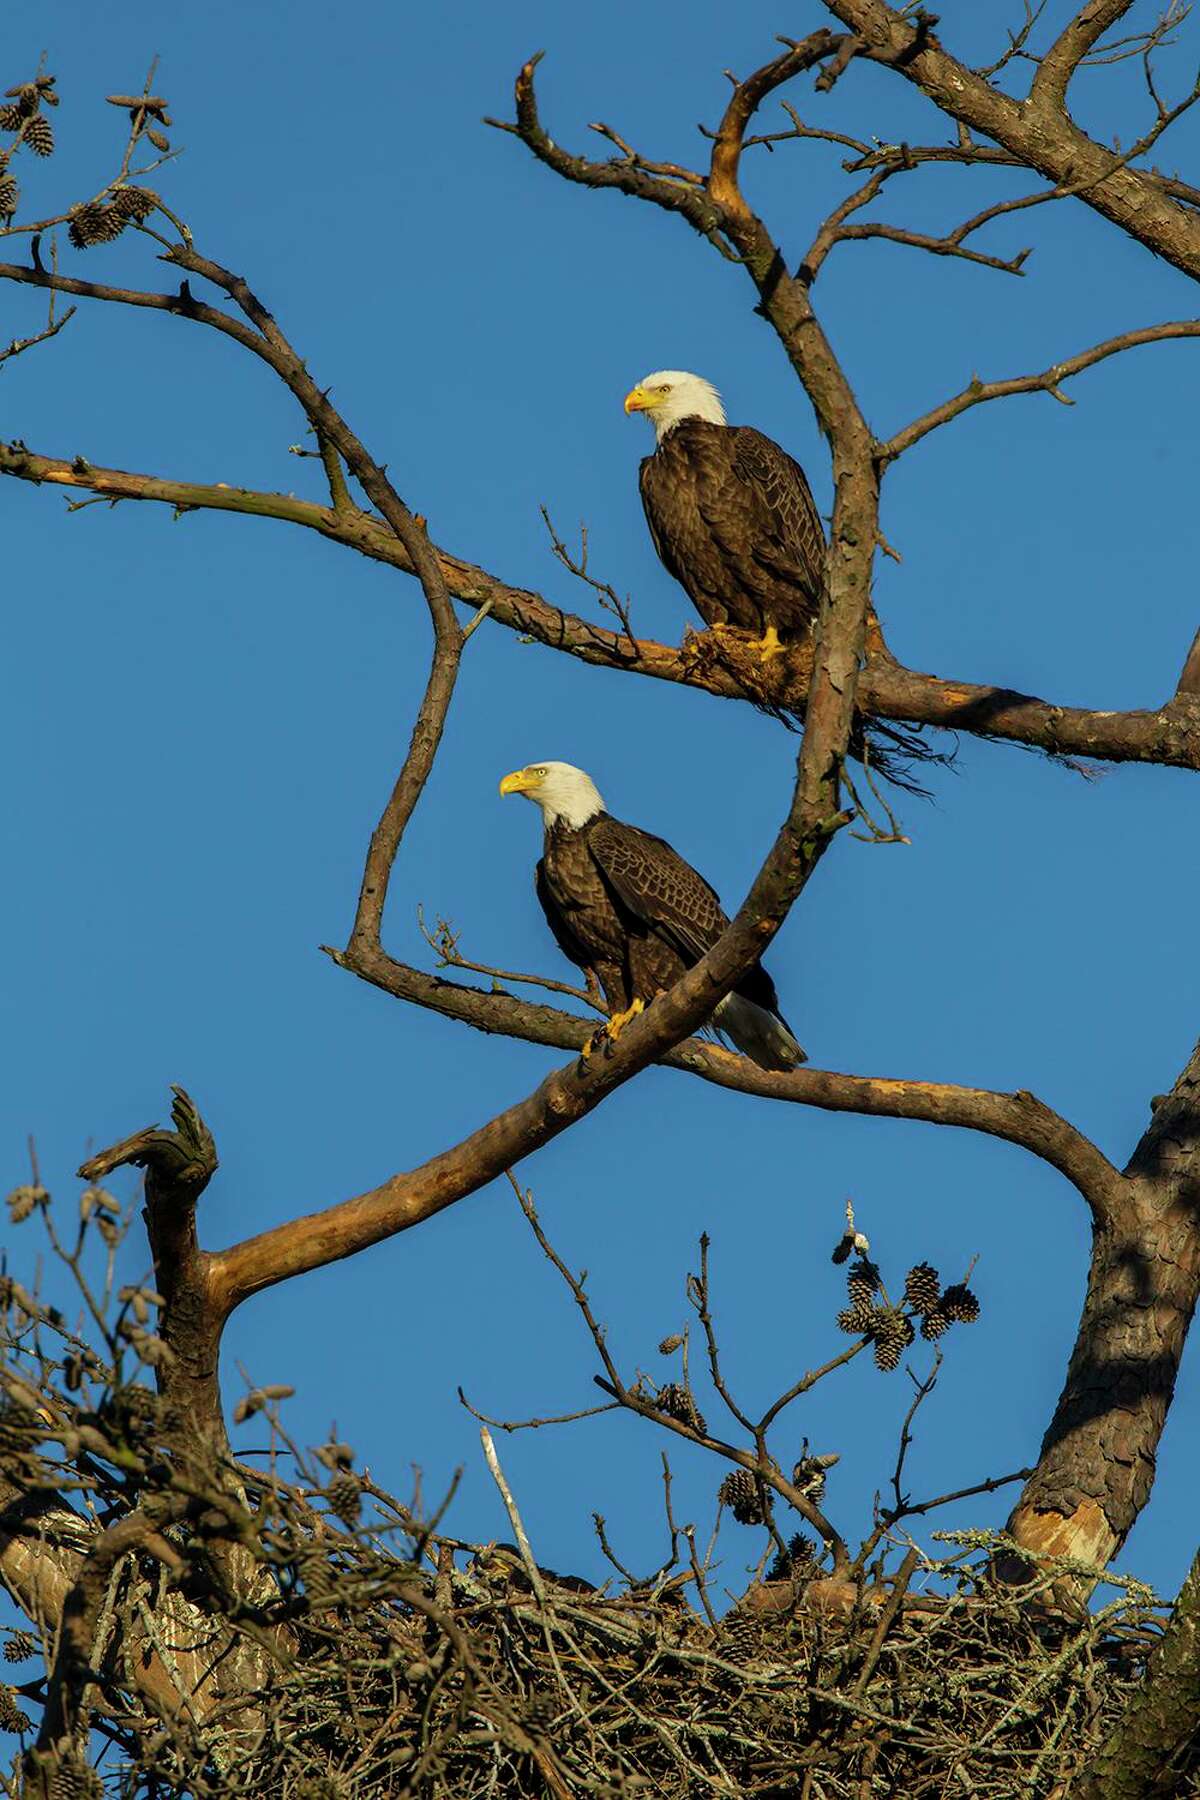 Bald eagles pairs form bonds for life. Adult birds stand 3 feet tall.